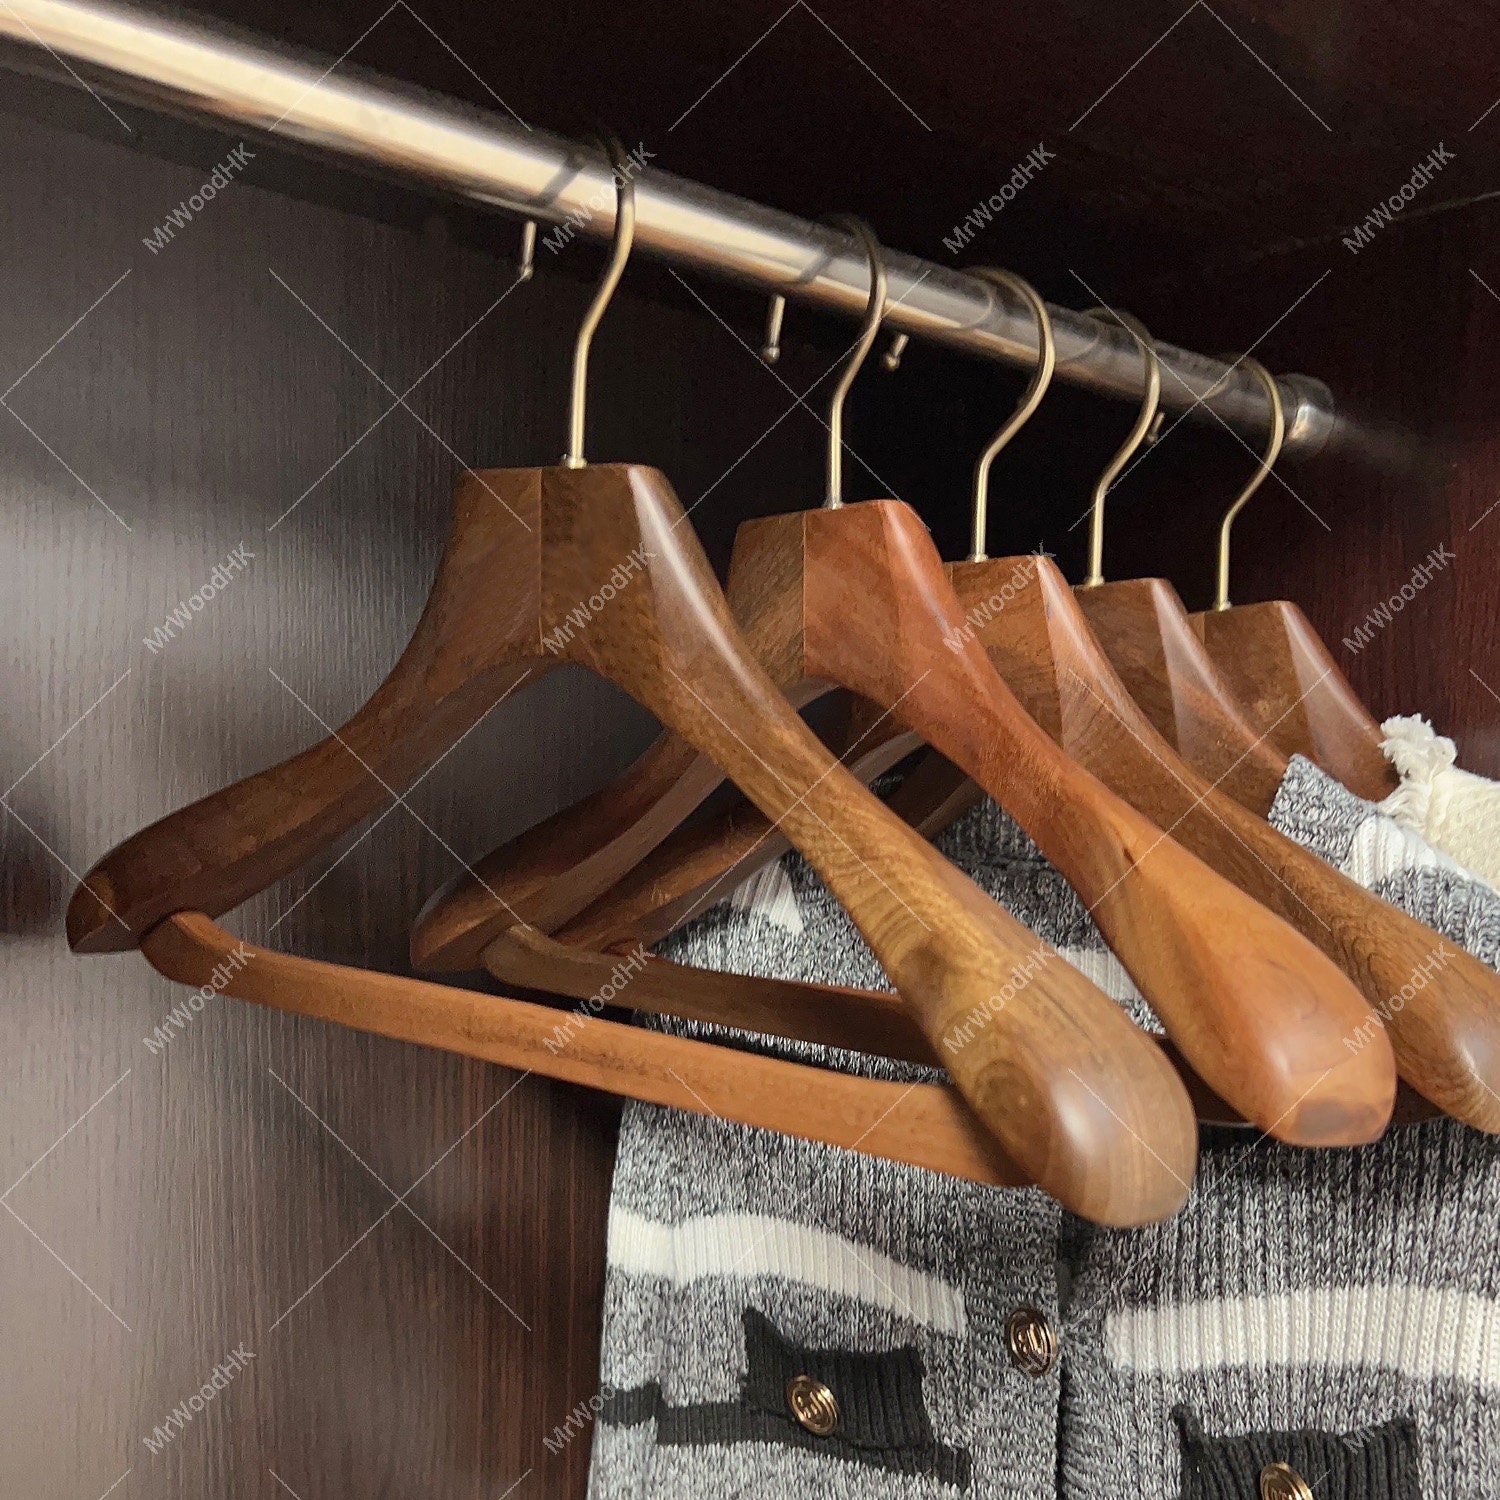 Lot of 12 Natural Wood Hangers Top Shirts Suits Standard Adult